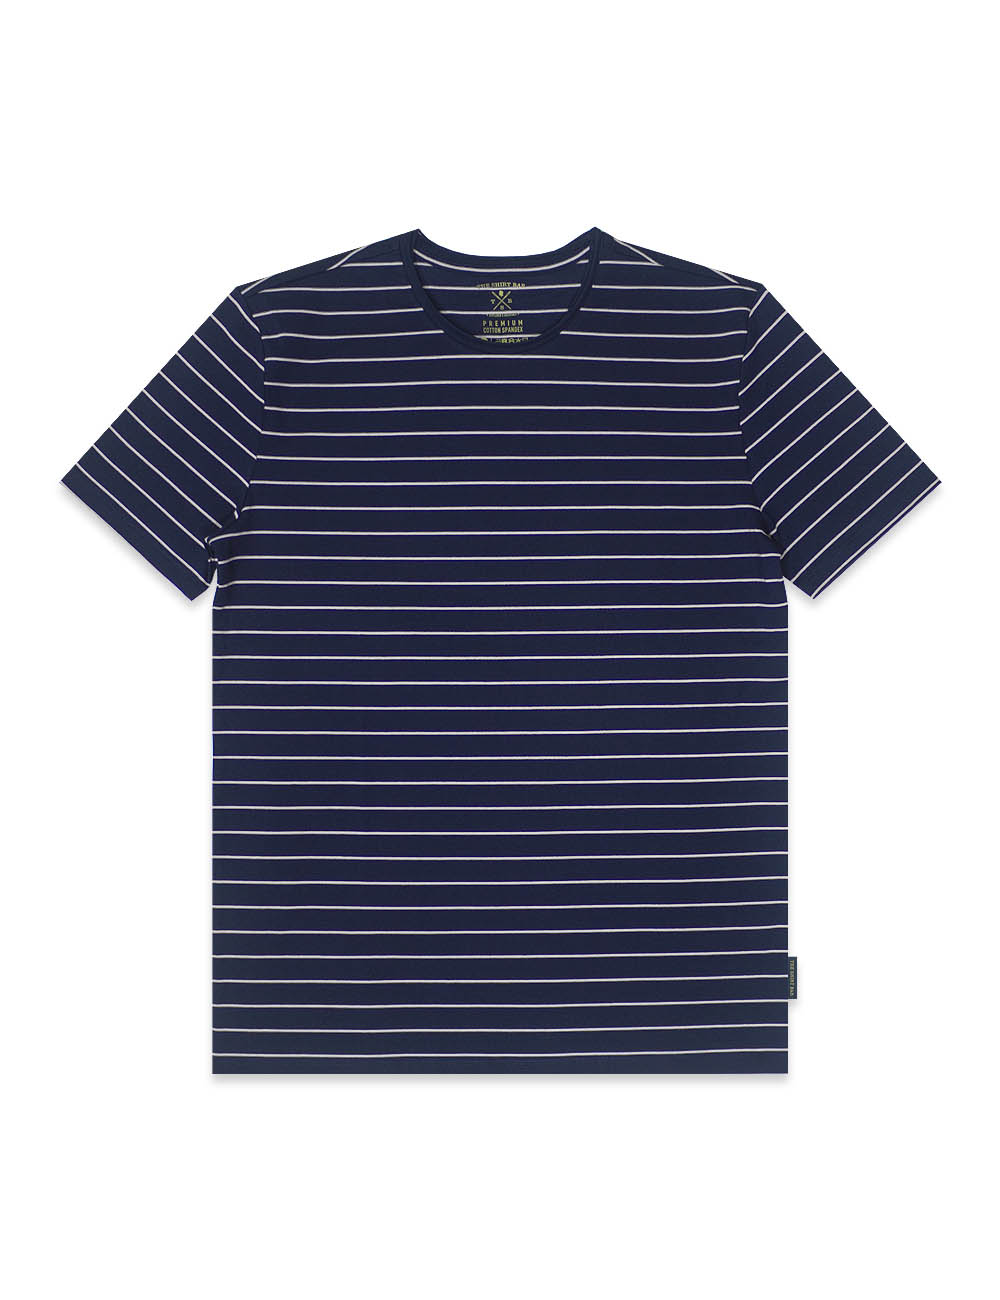 Navy With White Stripe Raw Edge Short Sleeve T-shirt - TS2A9.5